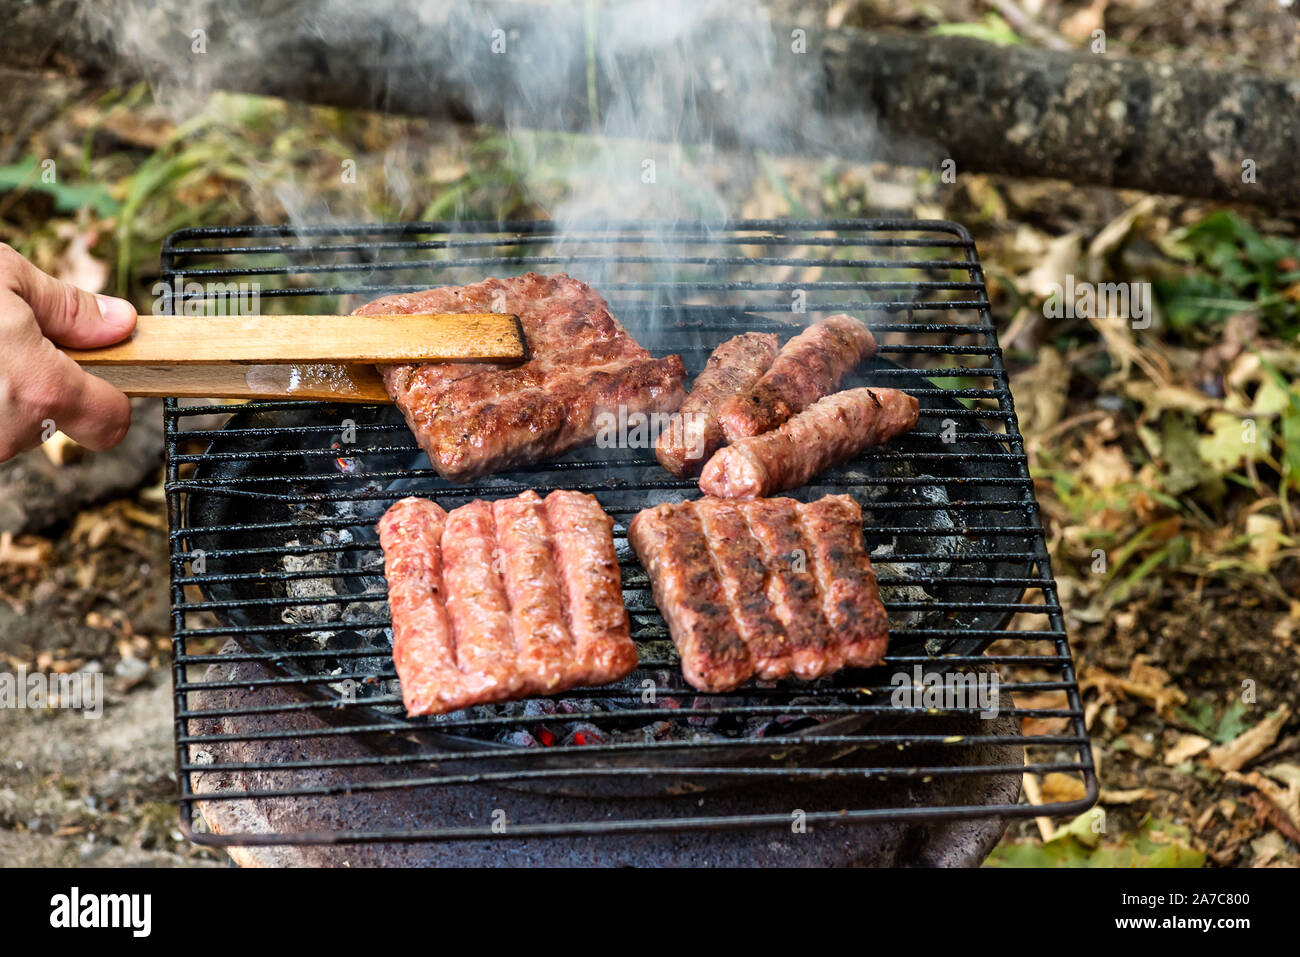 Balkan cuisine Pork Cevapi, grilled minced meat, on the improvised grill  Stock Photo - Alamy